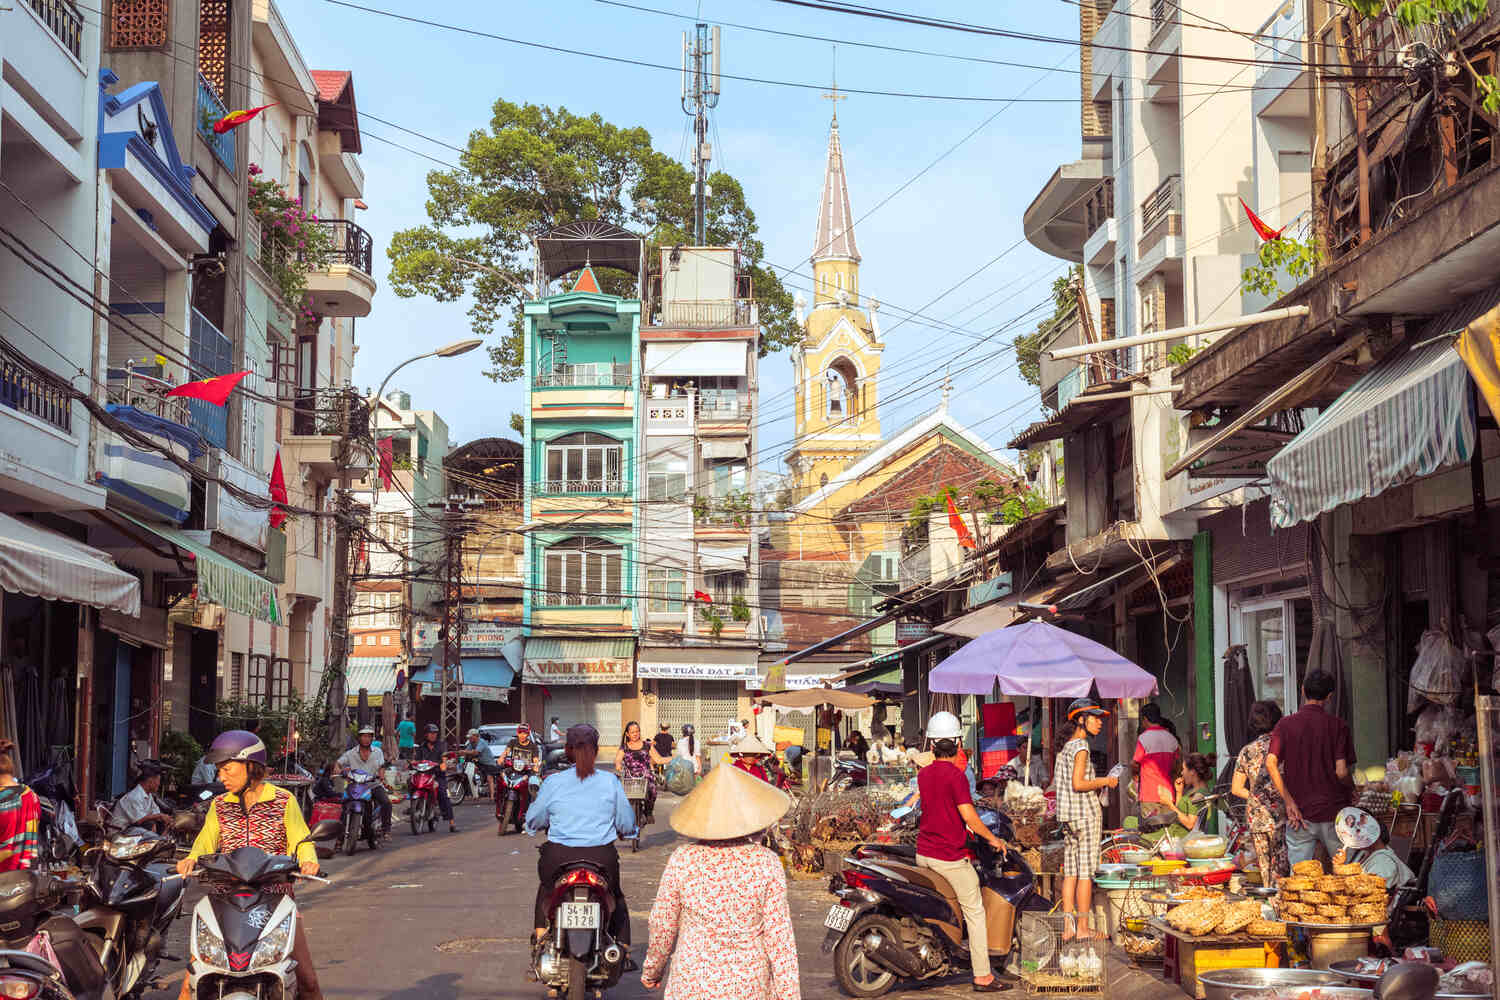 Vibrant Hanoi street scene with local businesses, pedestrians, and motorbikes under the shade of lush trees.